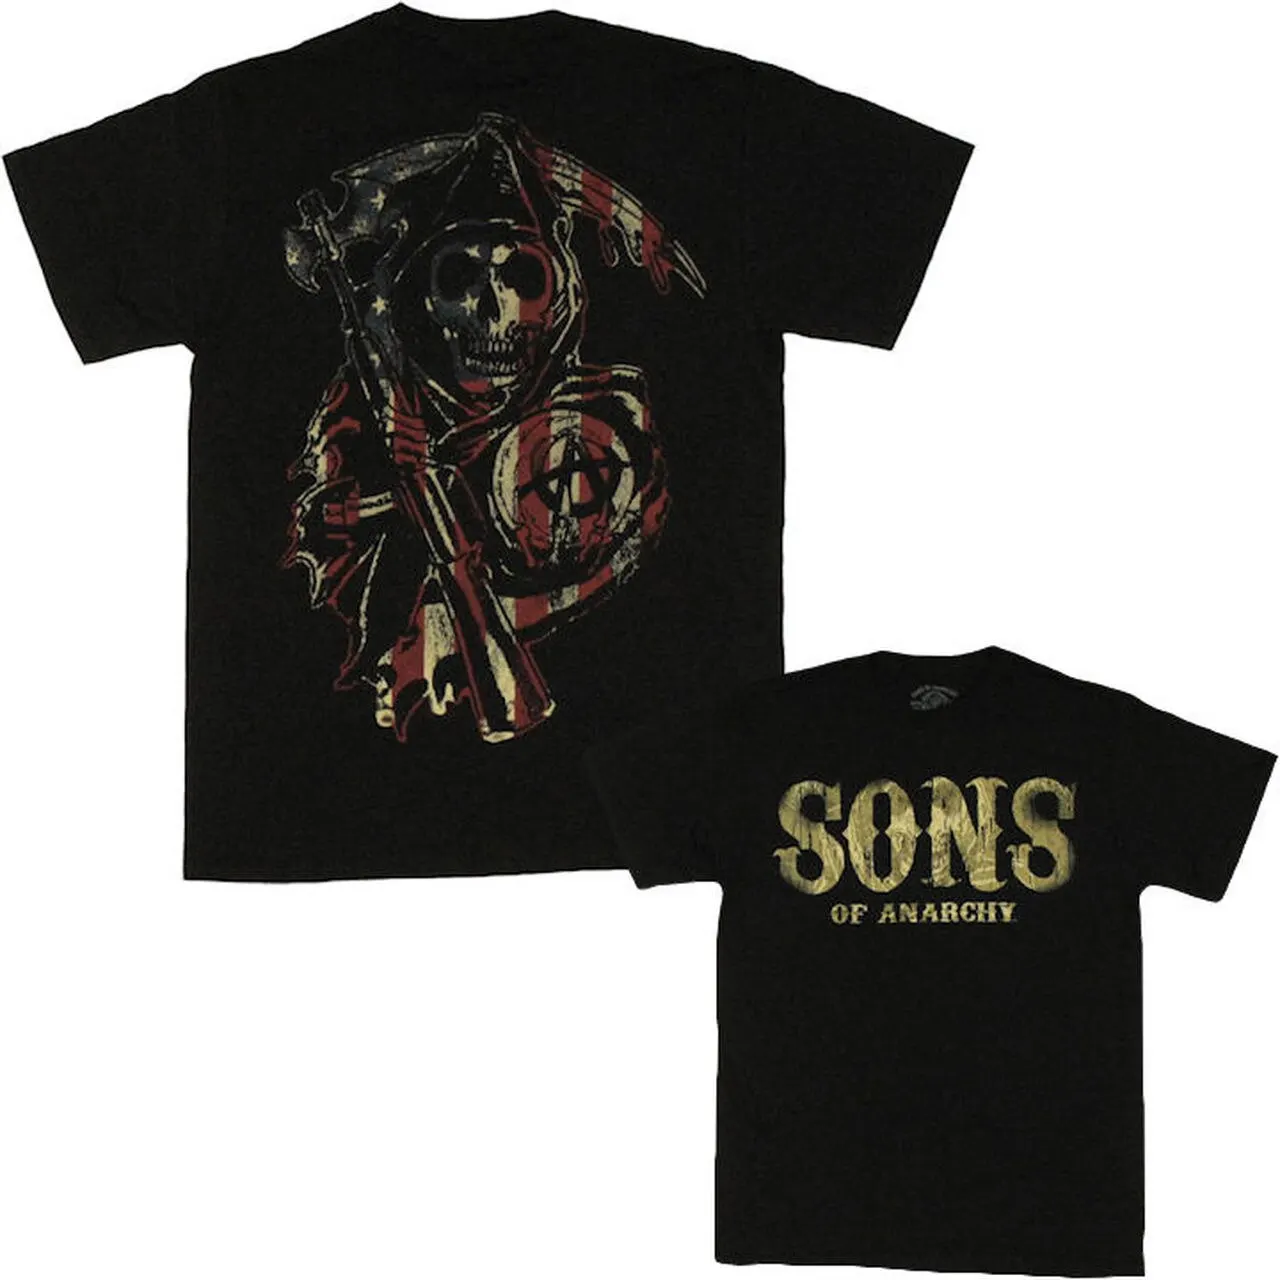 

Sons of Anarchy, American Reaper. Fashion Printed T-Shirt Summer Cotton Short Sleeve O-Neck Men's T Shirt New S-3XL